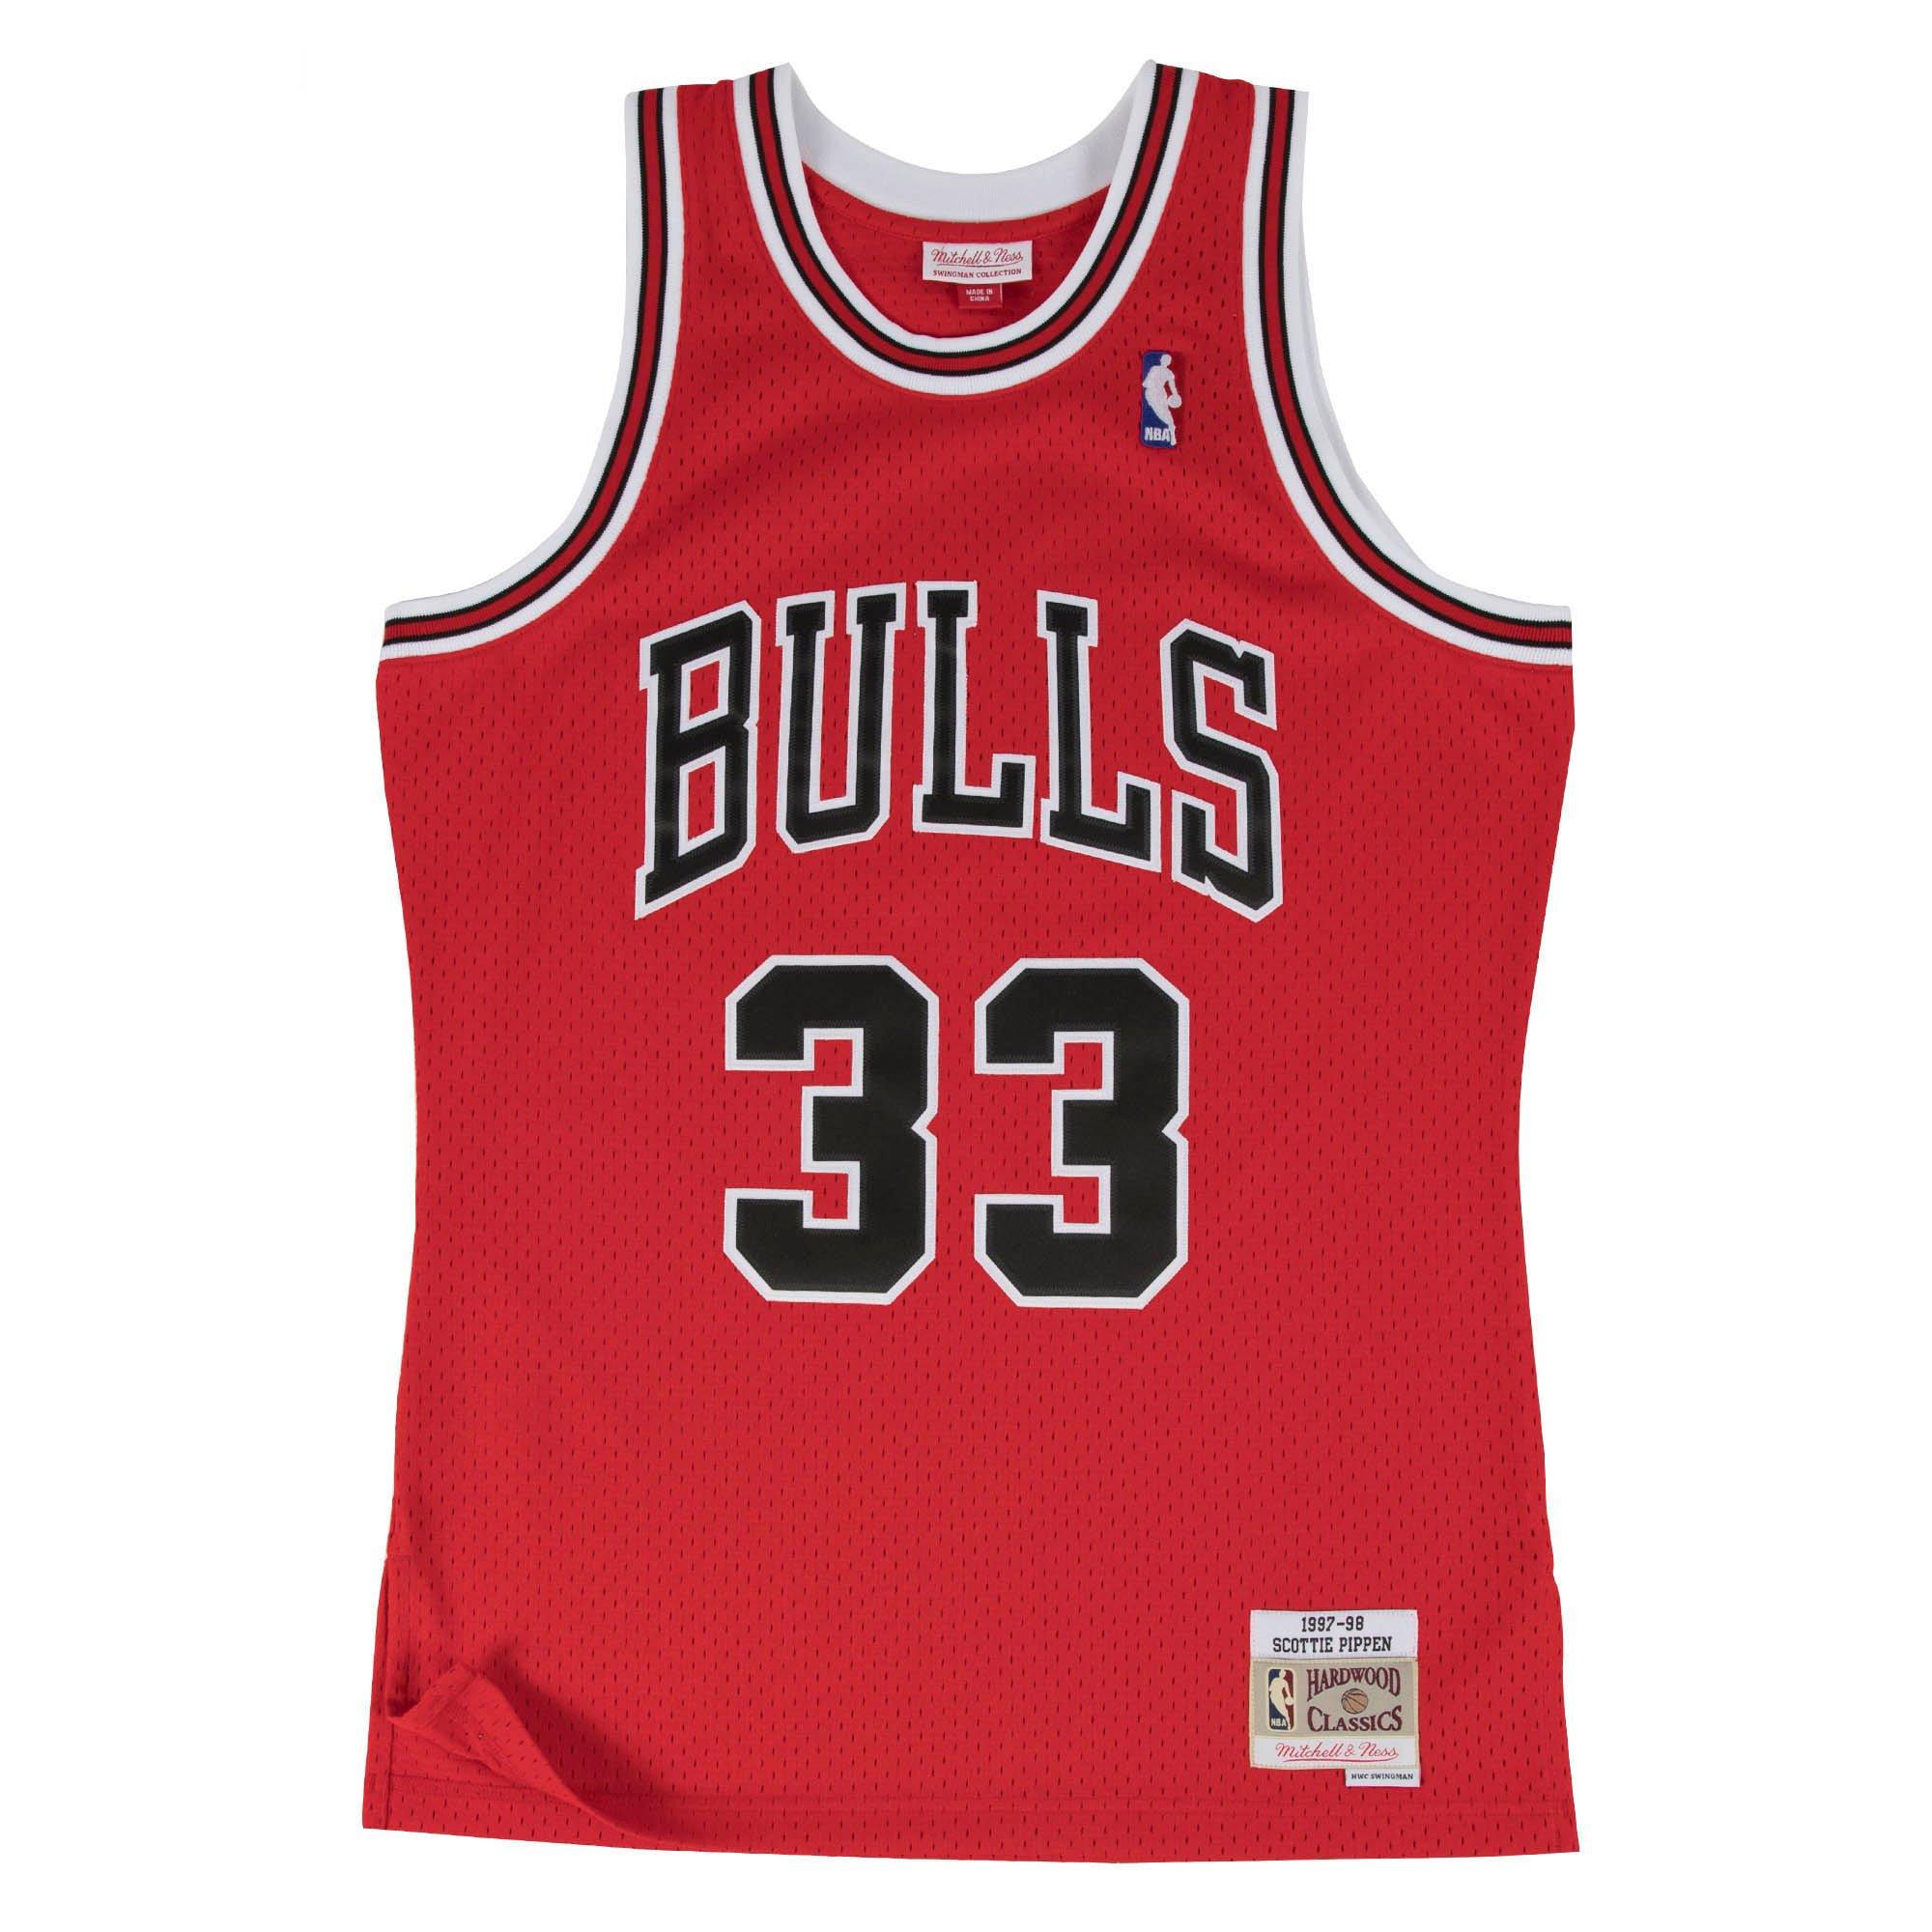 Source Scottie Pippen Black Best Quality Stitched Basketball